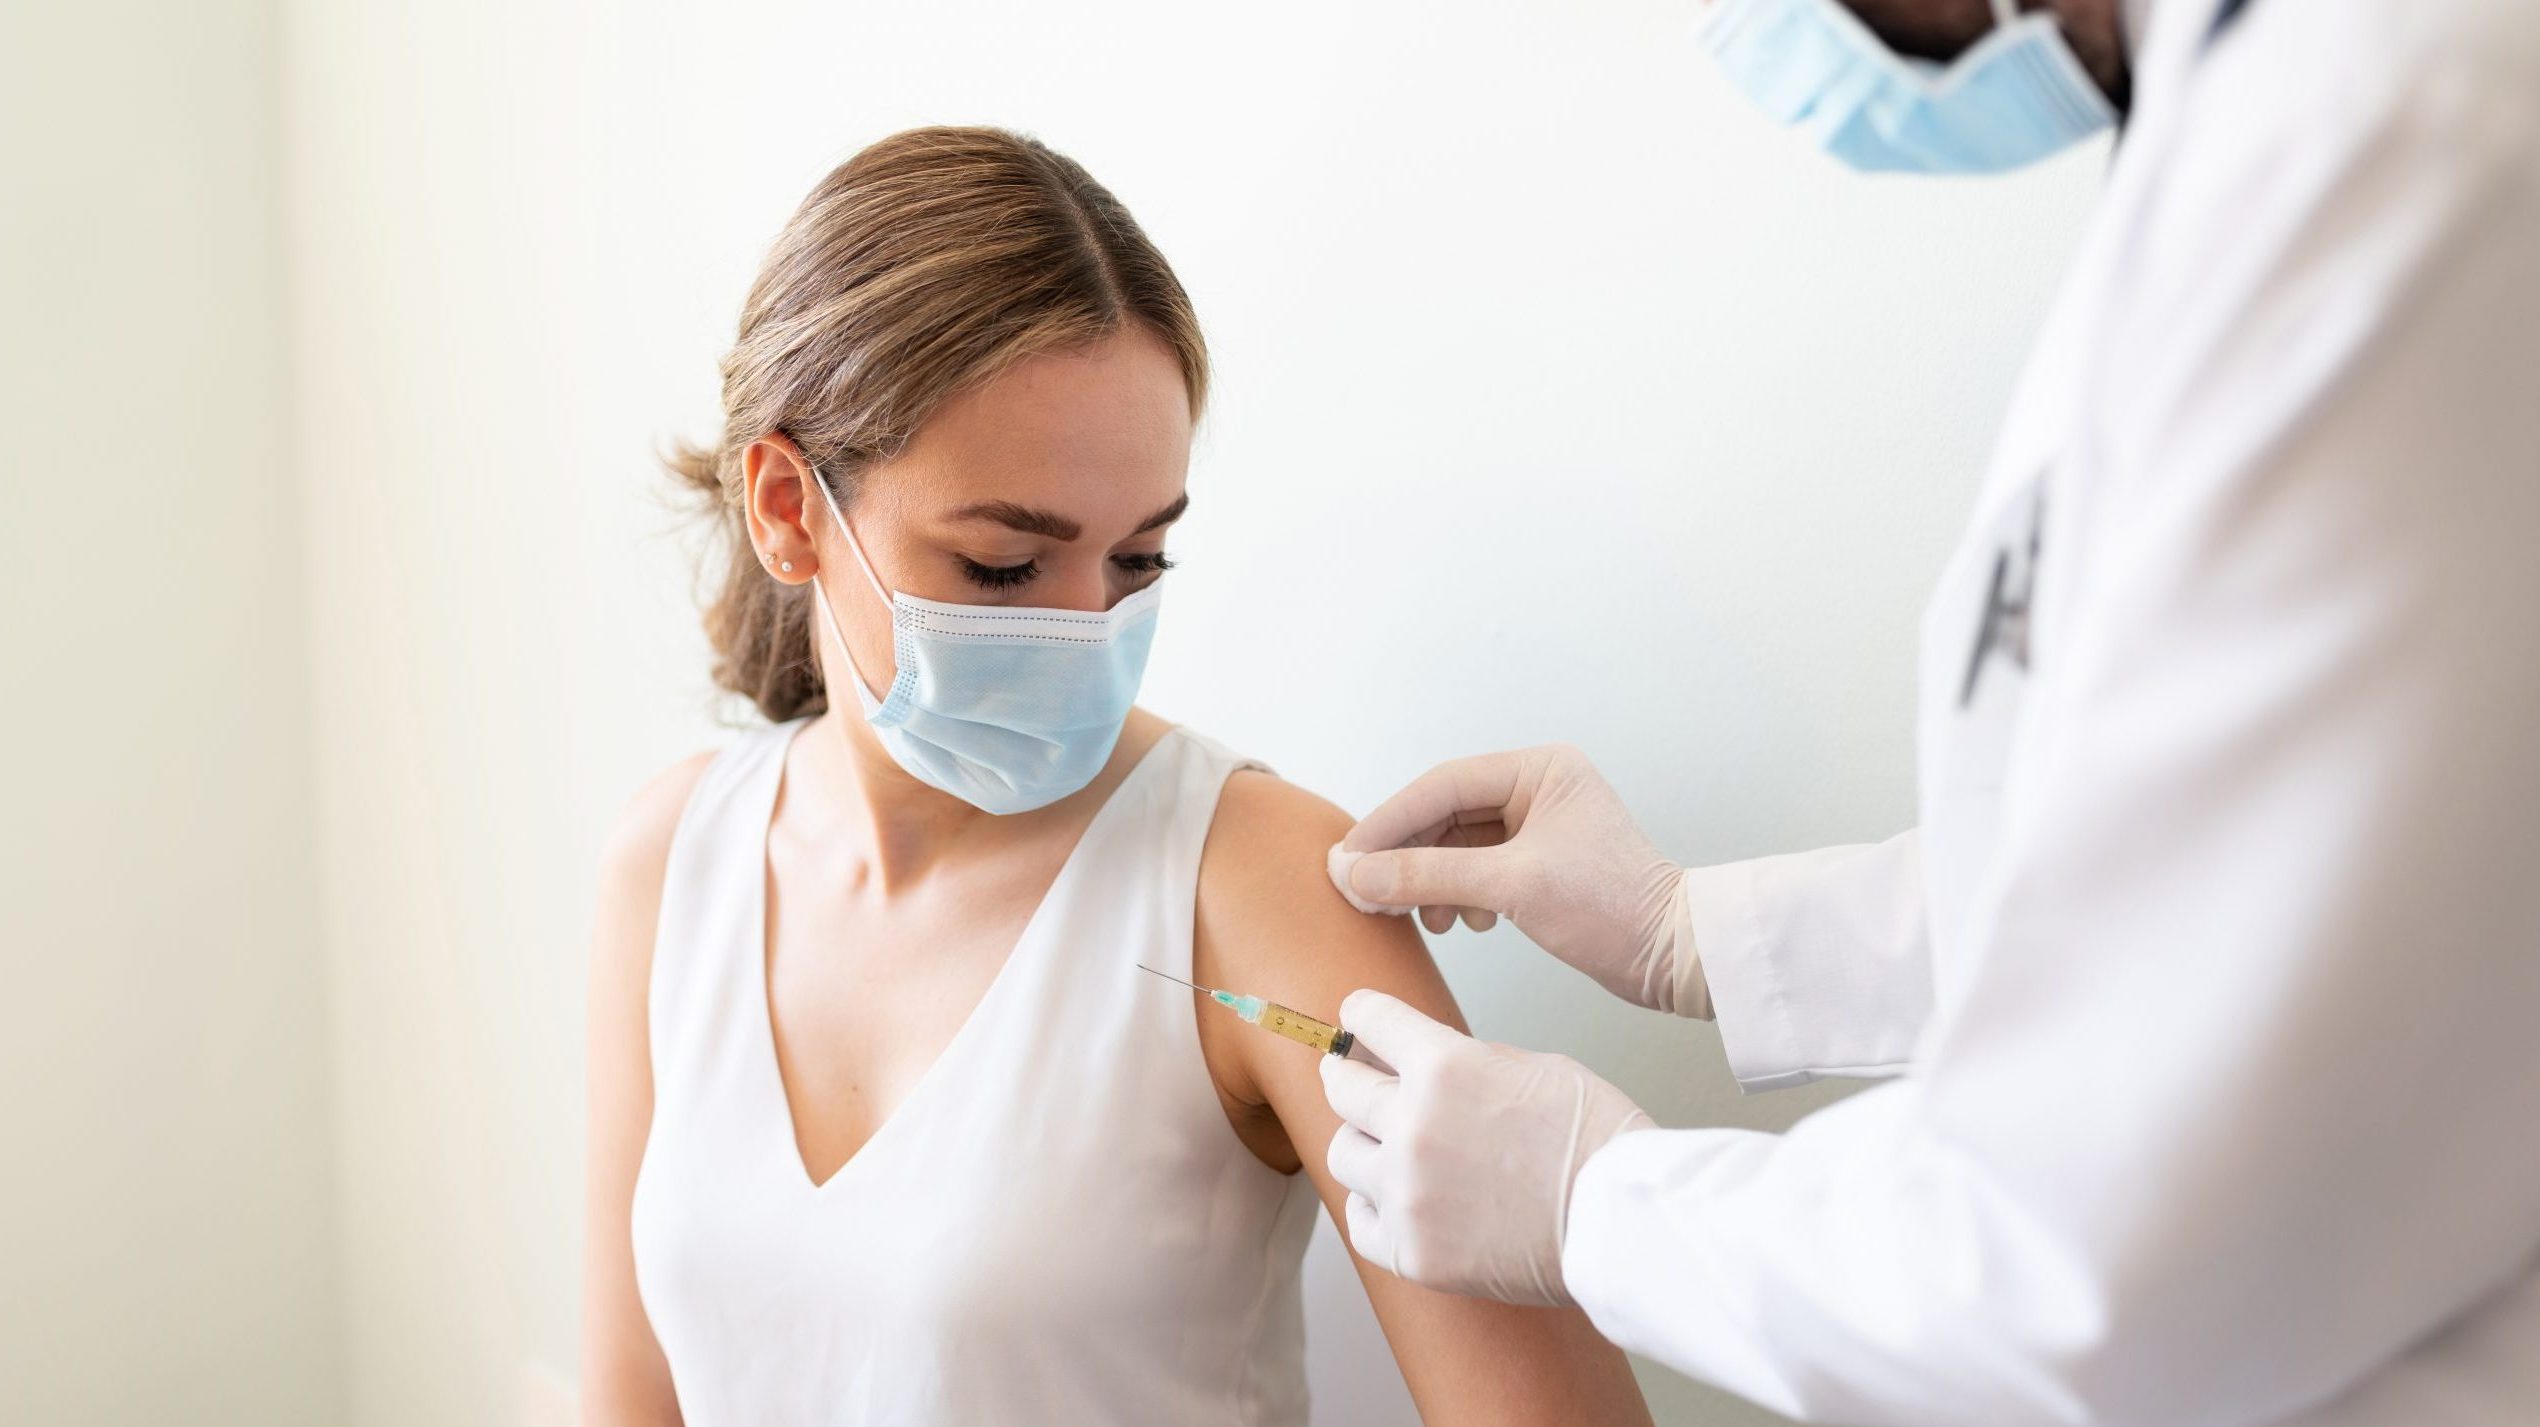 Patient receives vaccination in arm